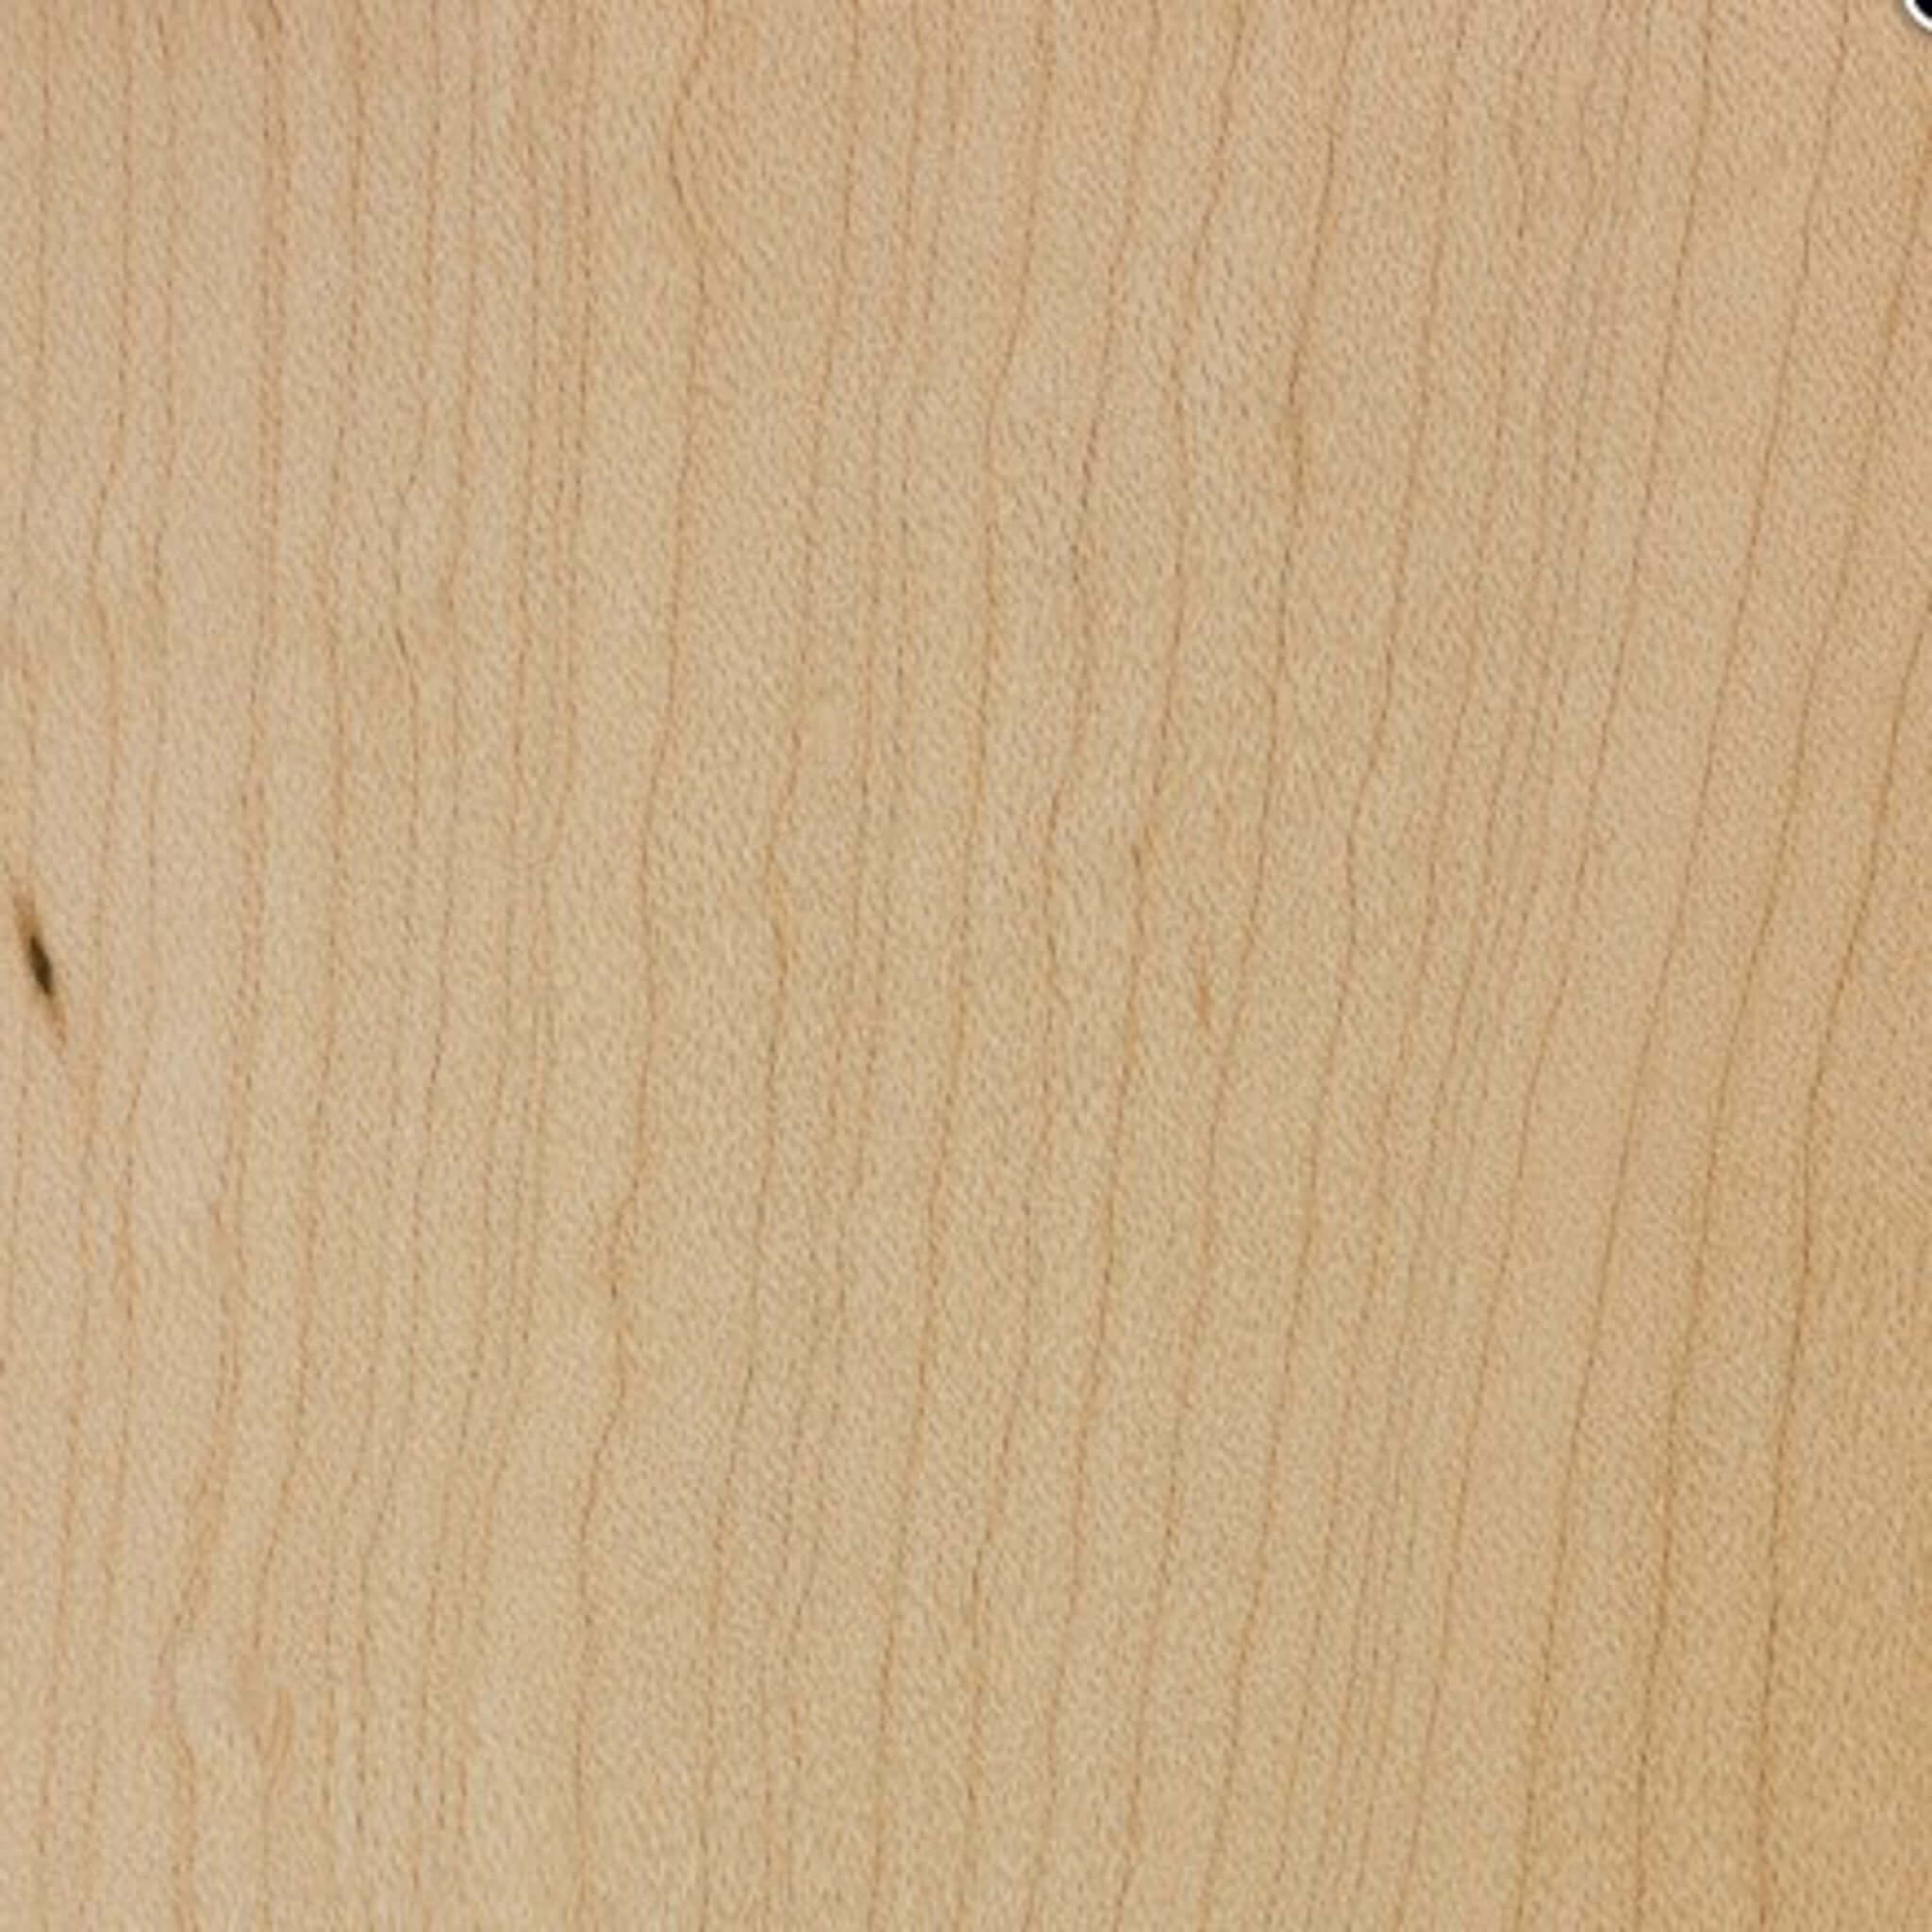 a sample of maple wood